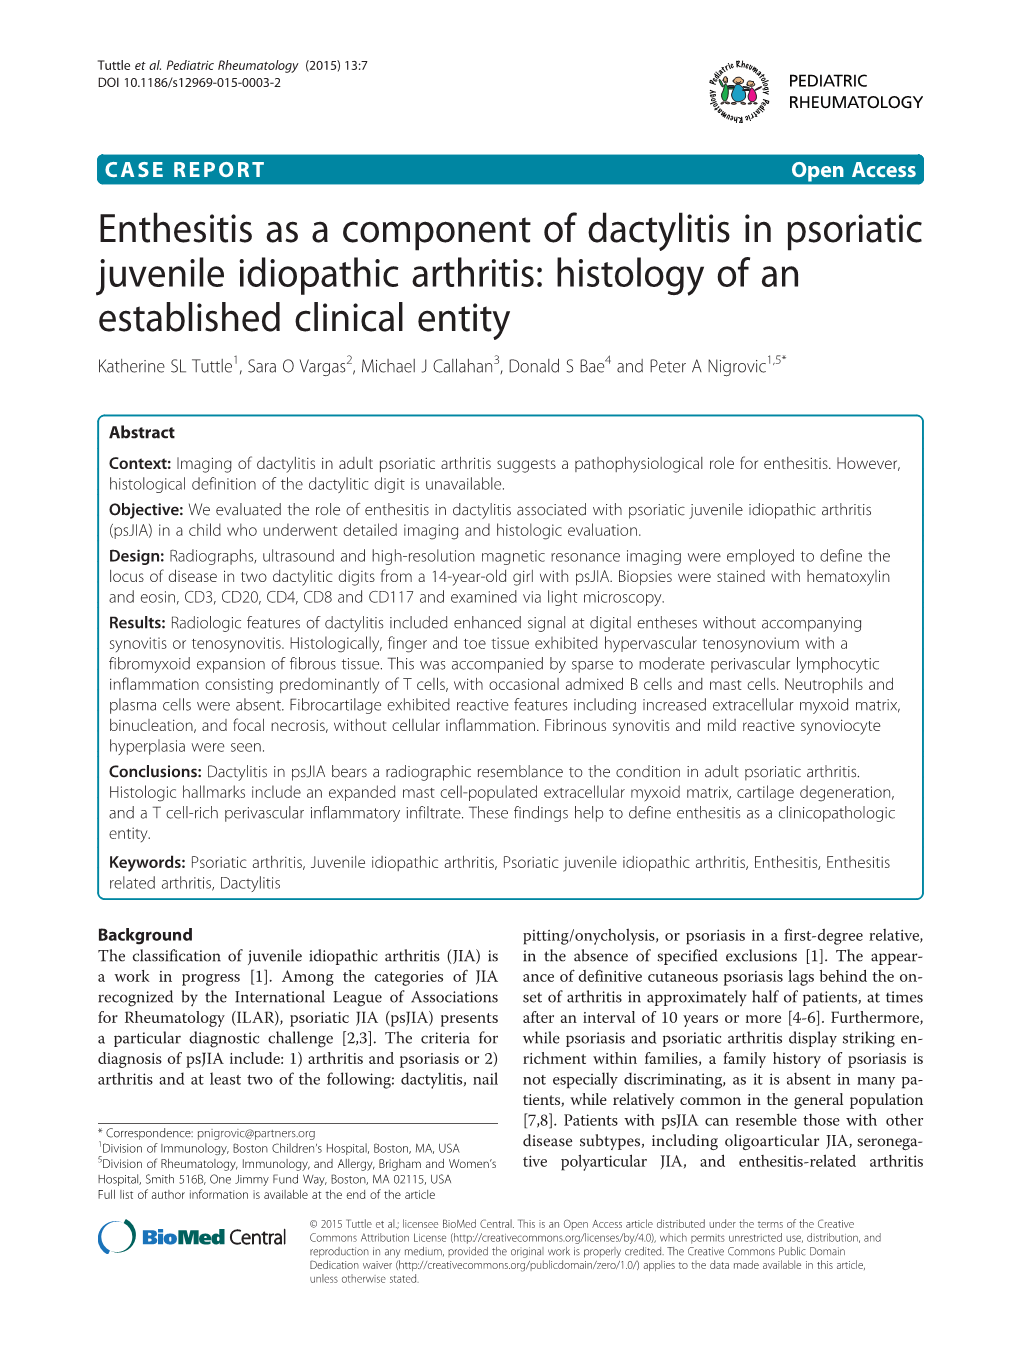 Enthesitis As a Component of Dactylitis in Psoriatic Juvenile Idiopathic Arthritis